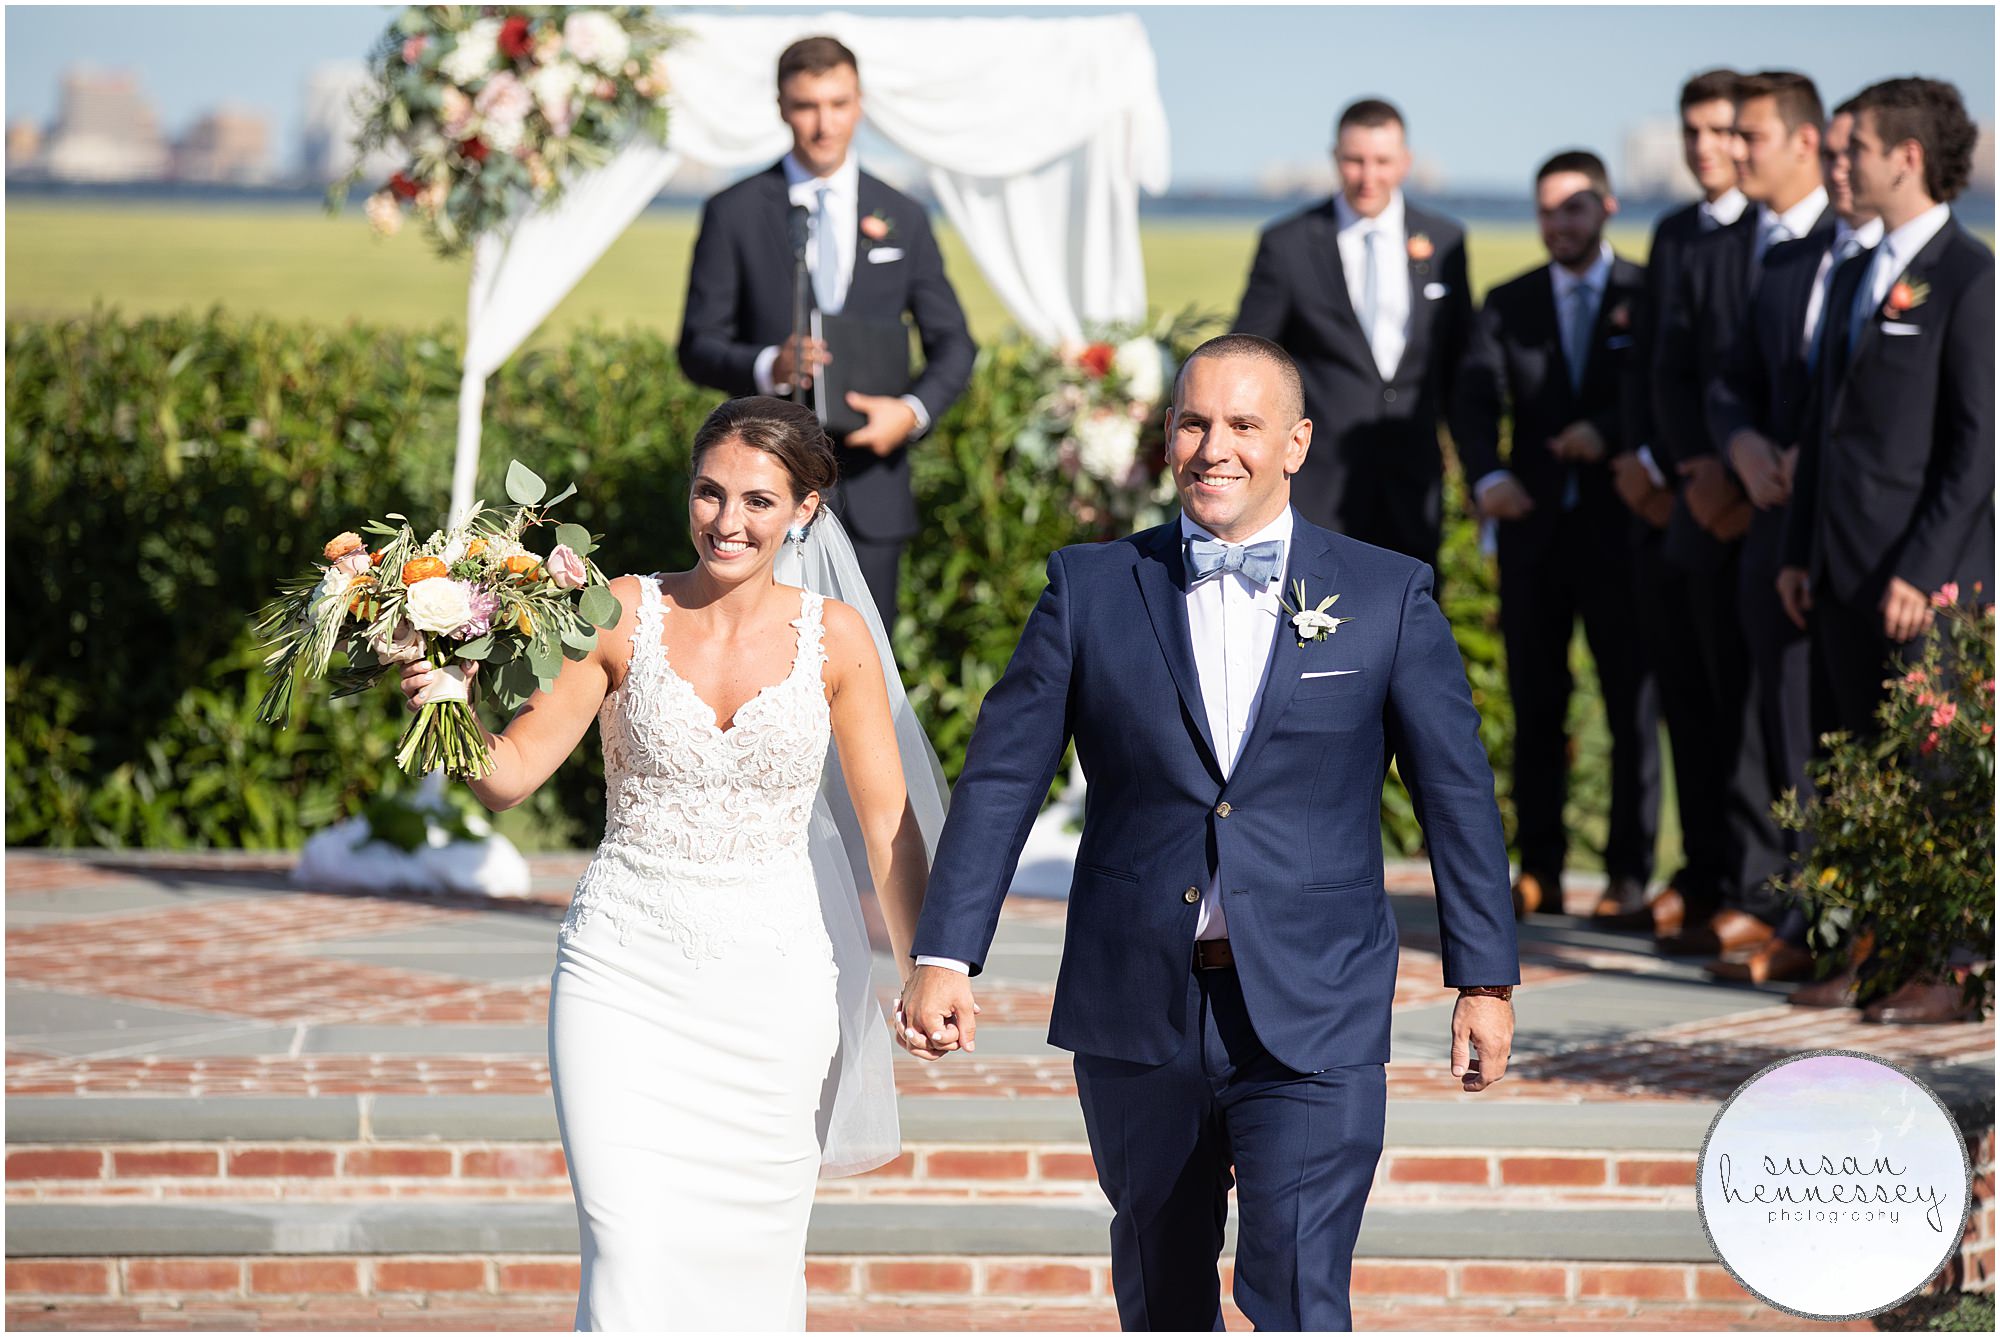 Bride and groom walk down aisle after getting married at an outdoor ceremony at Atlantic City Country Club